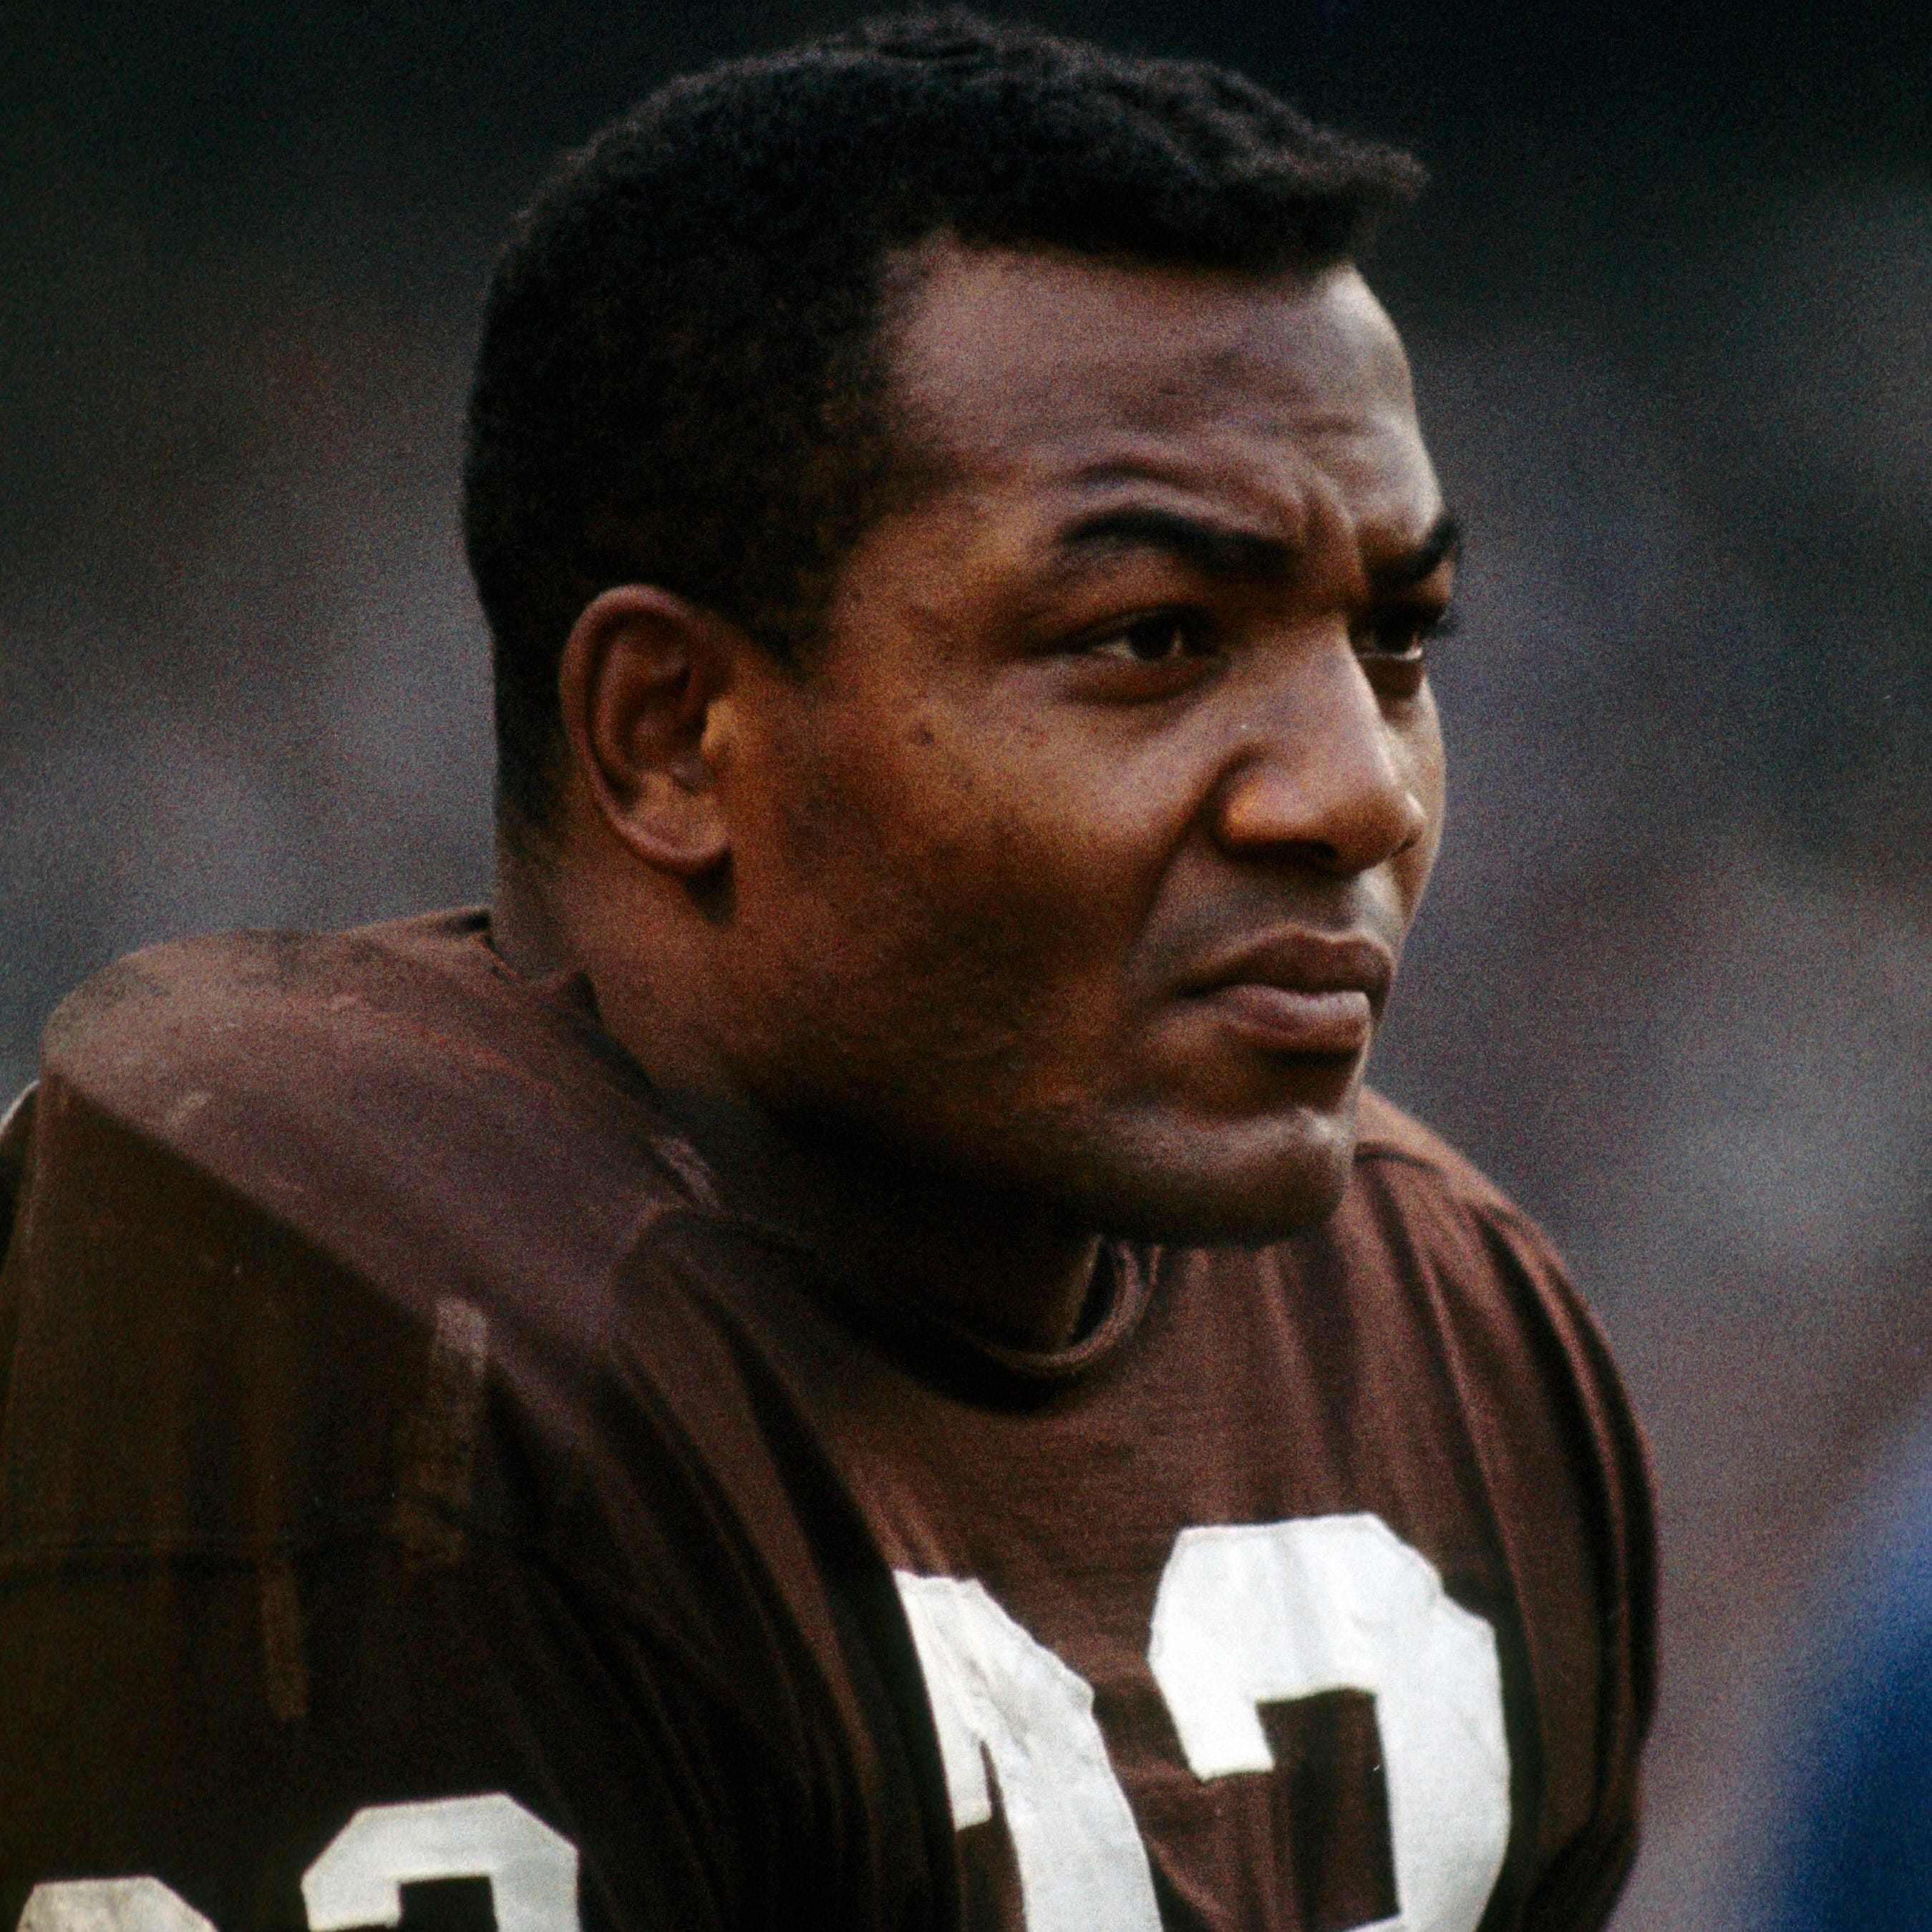 Cleveland Browns running back Jim Brown in 1963.